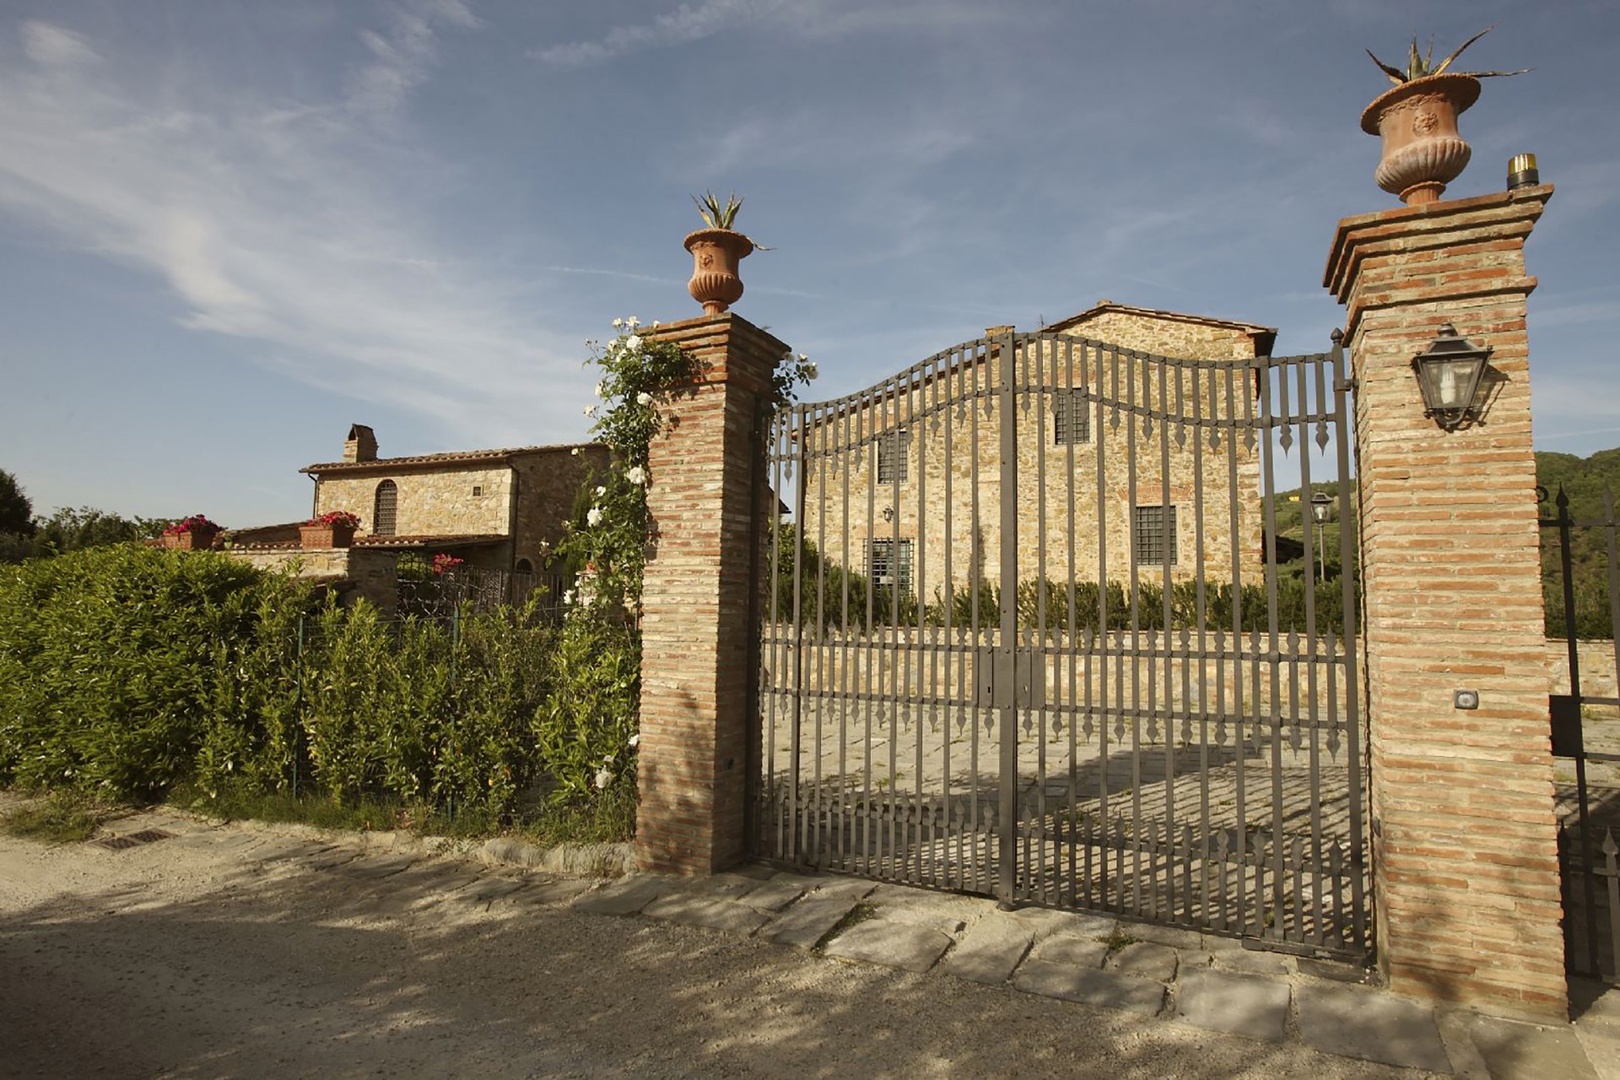 The front gate leads to a generous, paved parking area outside the villa.